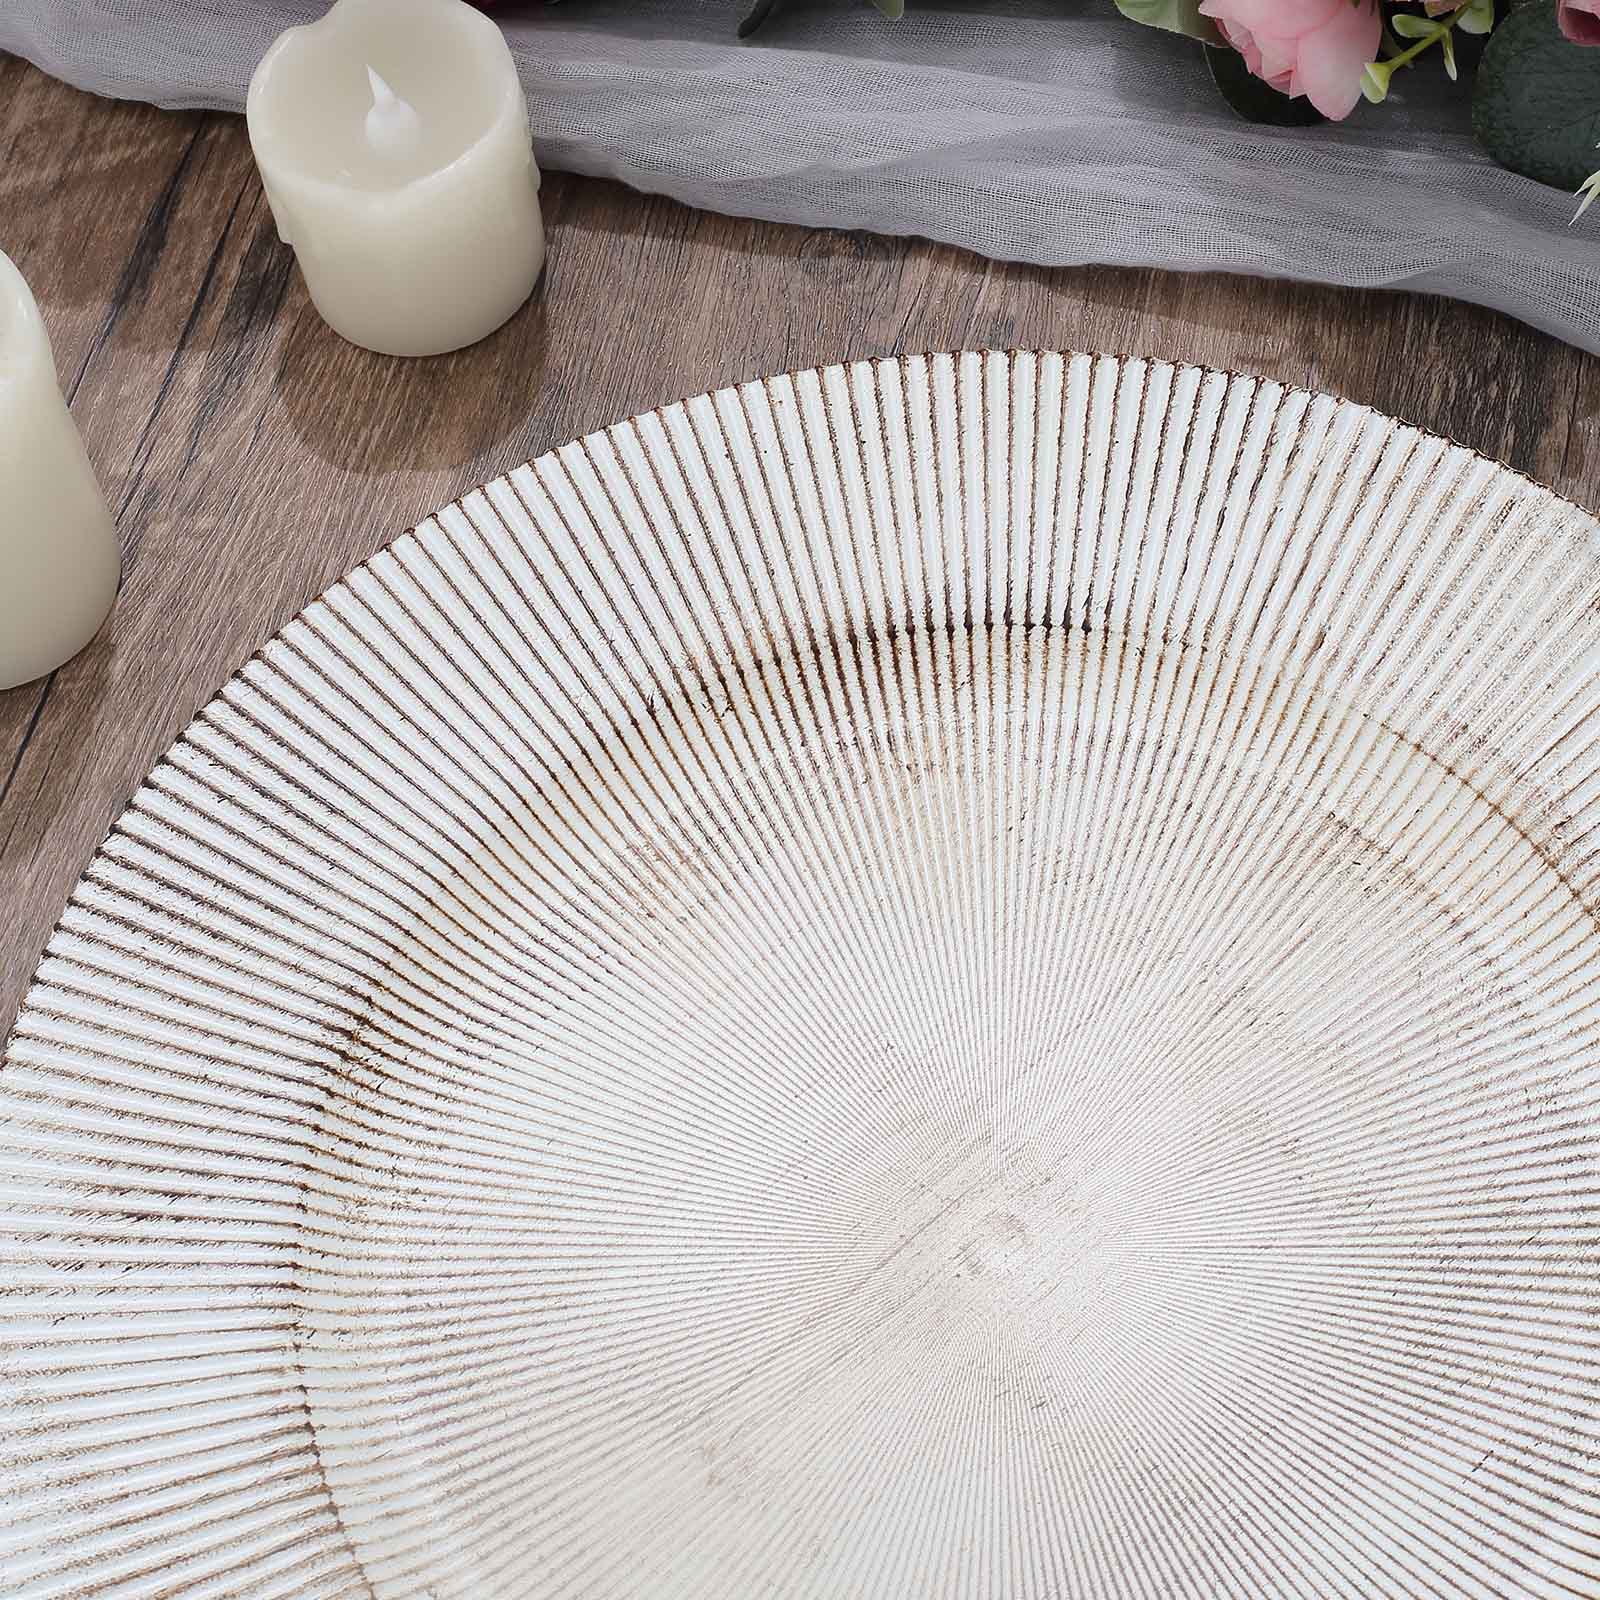 6 White Washed 13 in Rustic Wooden Round Plastic Charger Plates with Sunray Trim